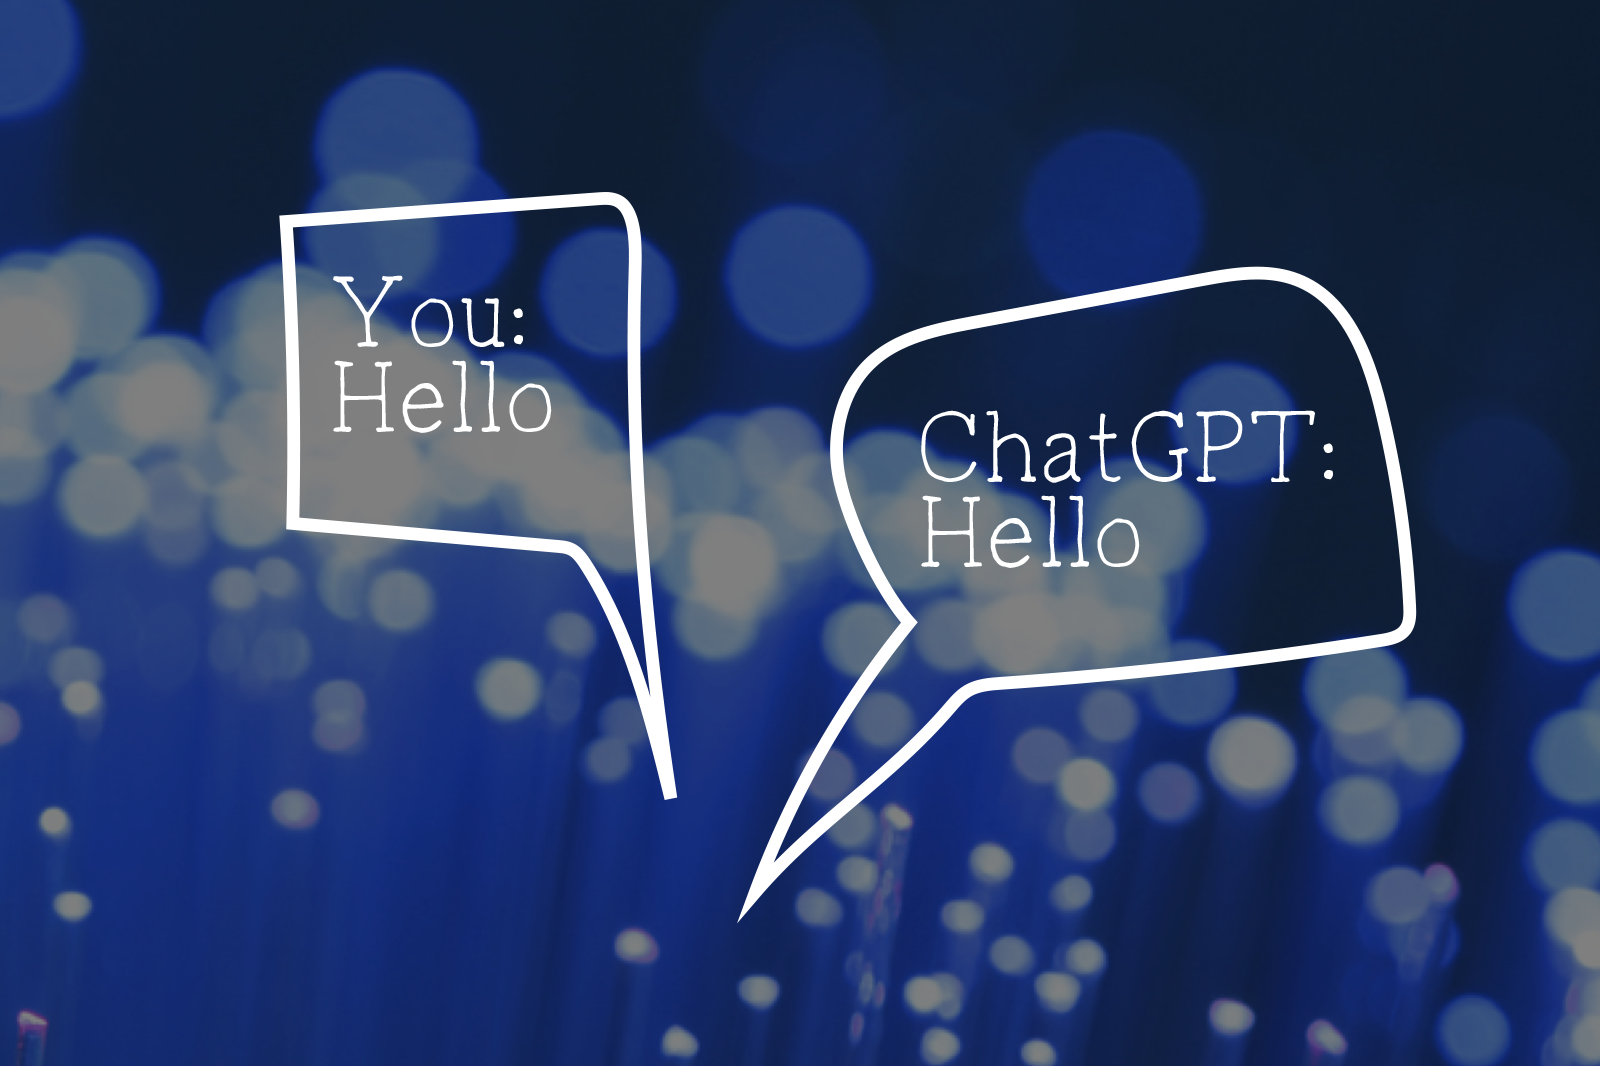 Chat to ChatGPT mocked up with speech bubbles